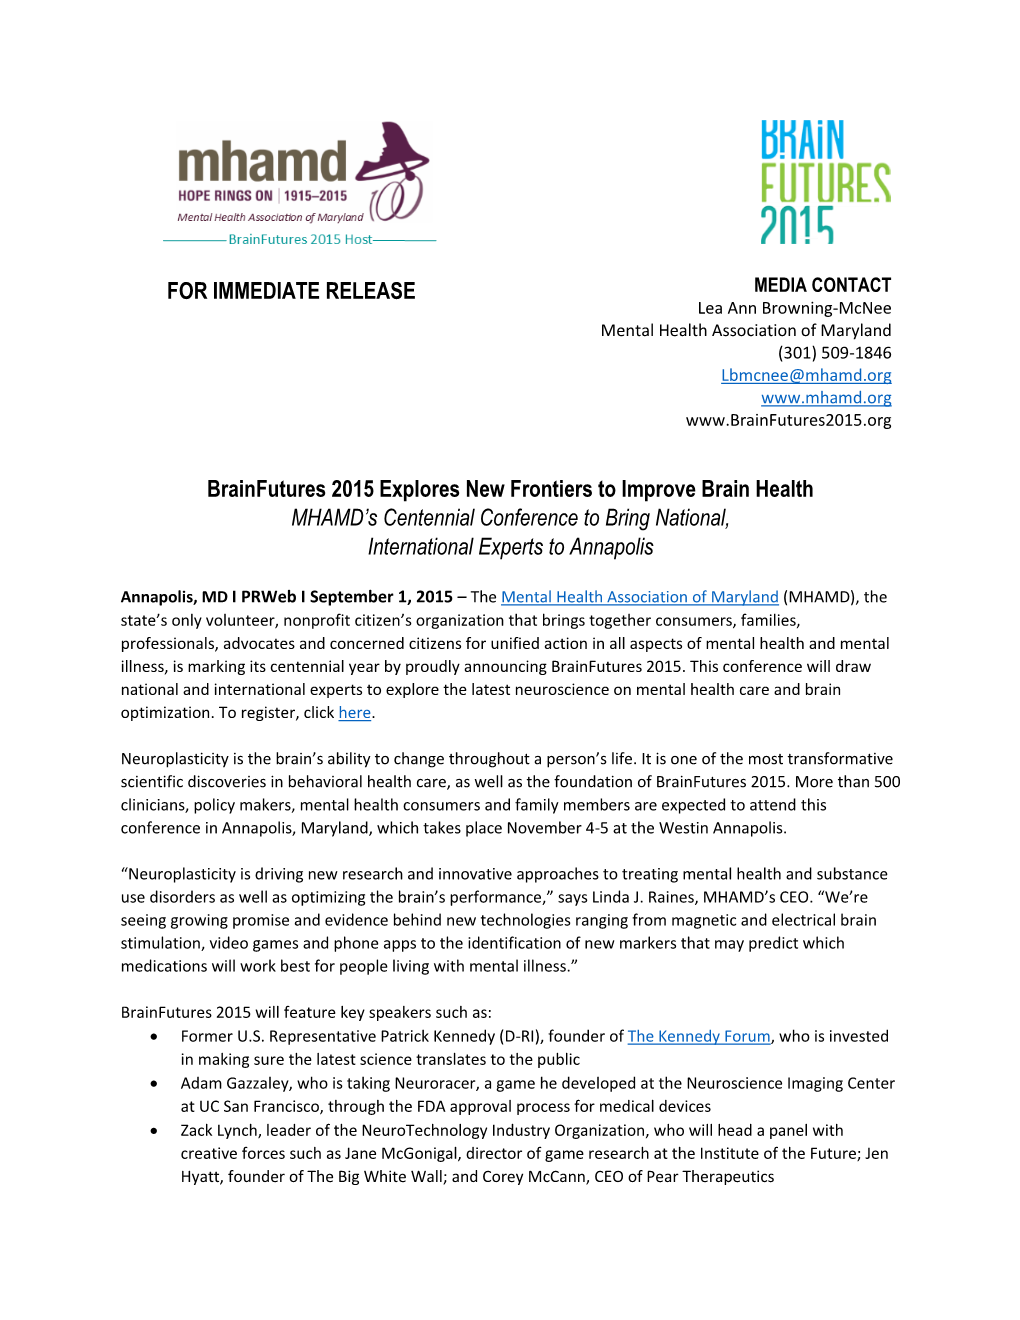 FOR IMMEDIATE RELEASE Brainfutures 2015 Explores New